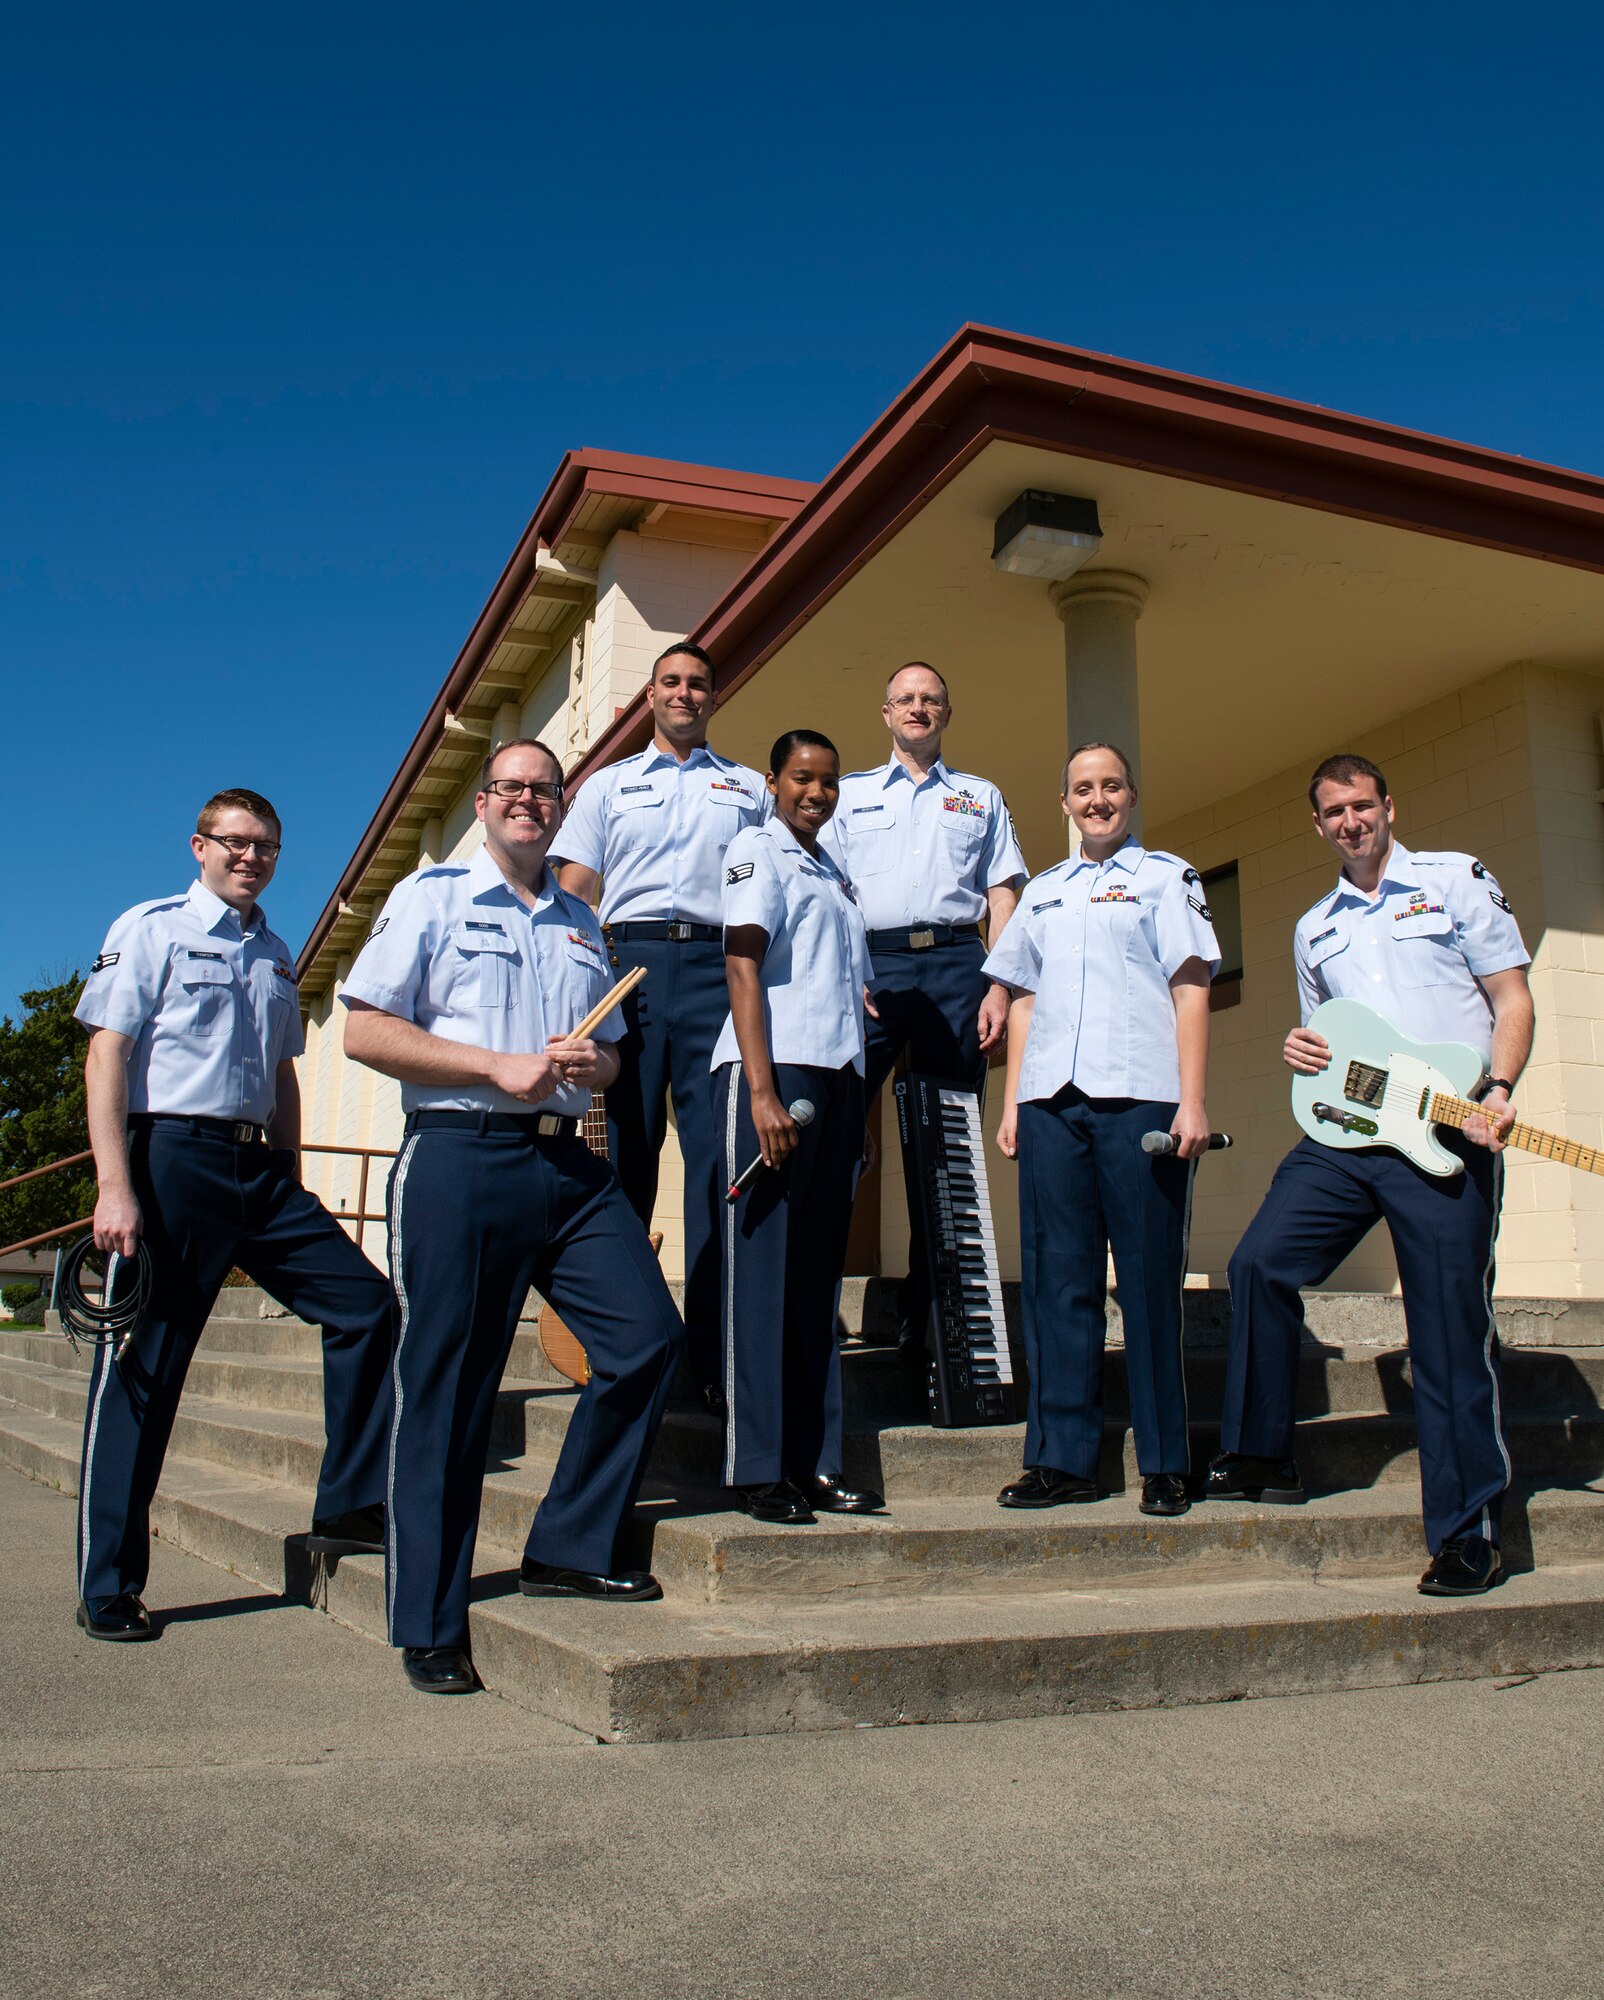 Airmen with the Band of the Golden West pose for a group photo at Travis Air Force Base, Mar. 11, 2019. (U.S. Air Force photo by Lan Kim)